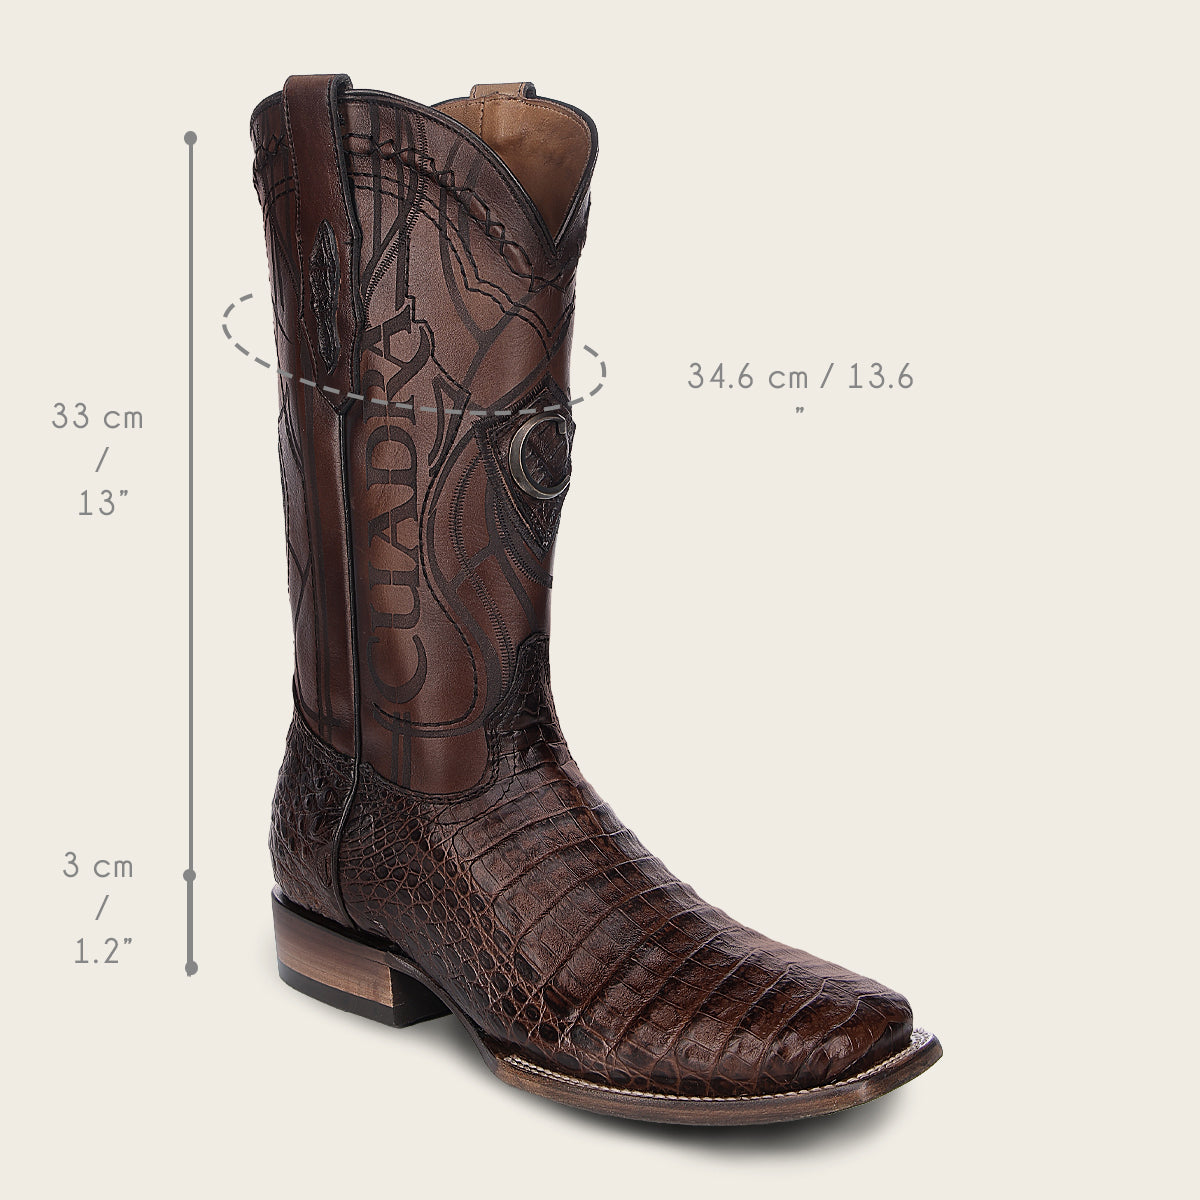 Engraved honey exotic cayman leather boot